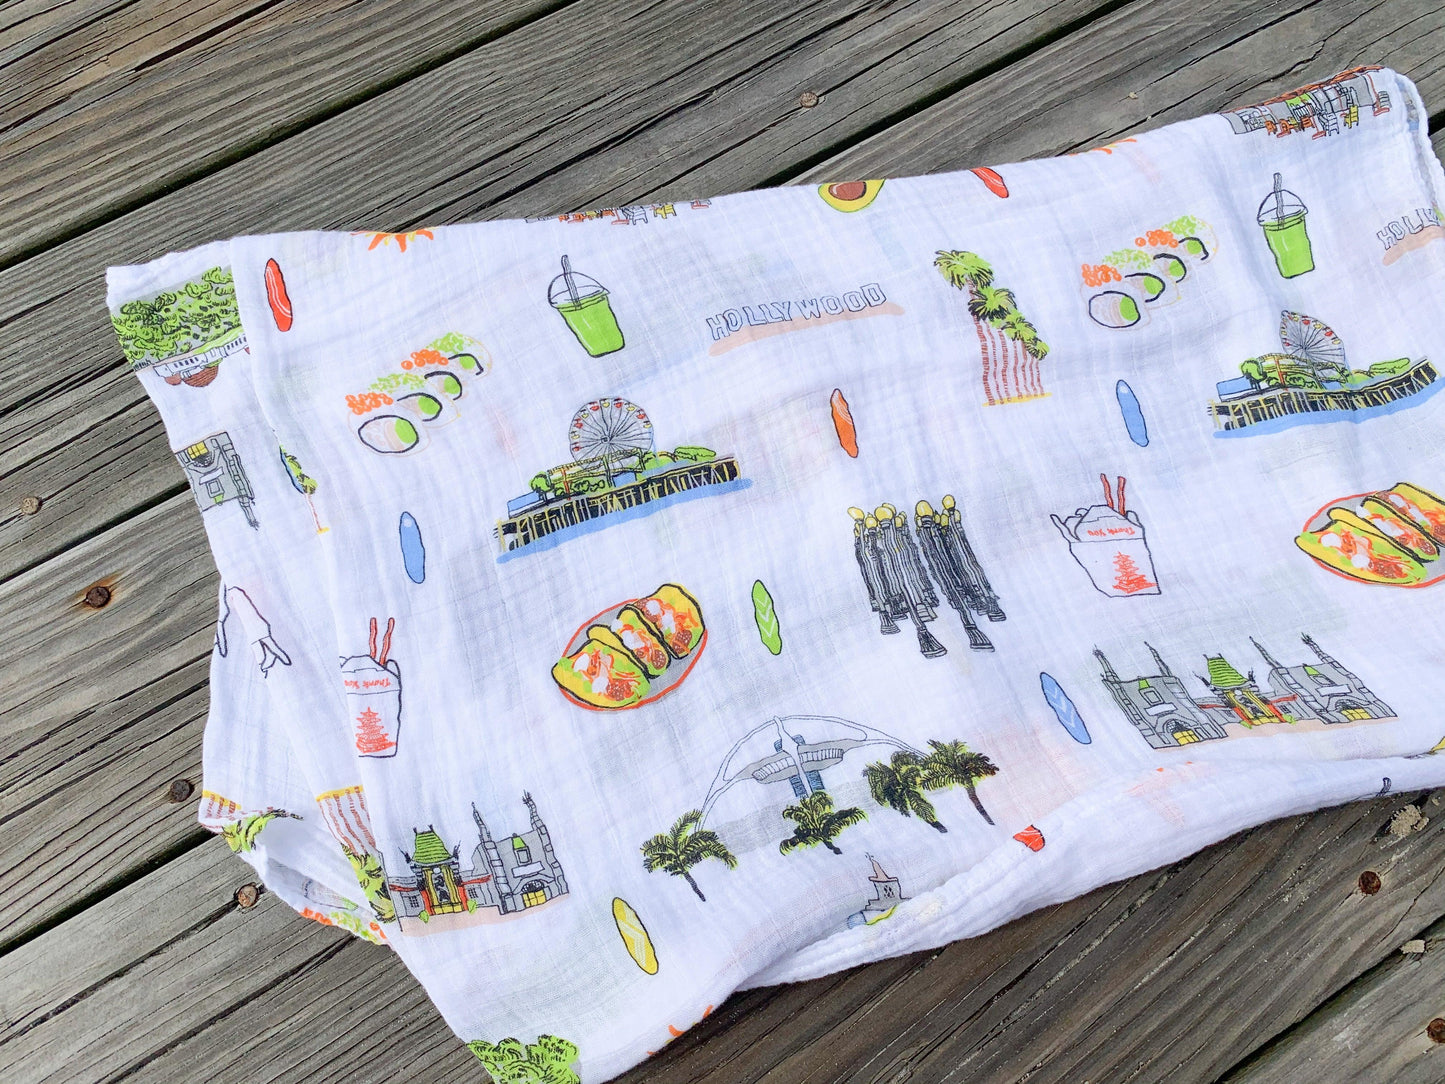 White muslin swaddle blanket with "Los Angeles" text and iconic city landmarks in soft pastel colors.